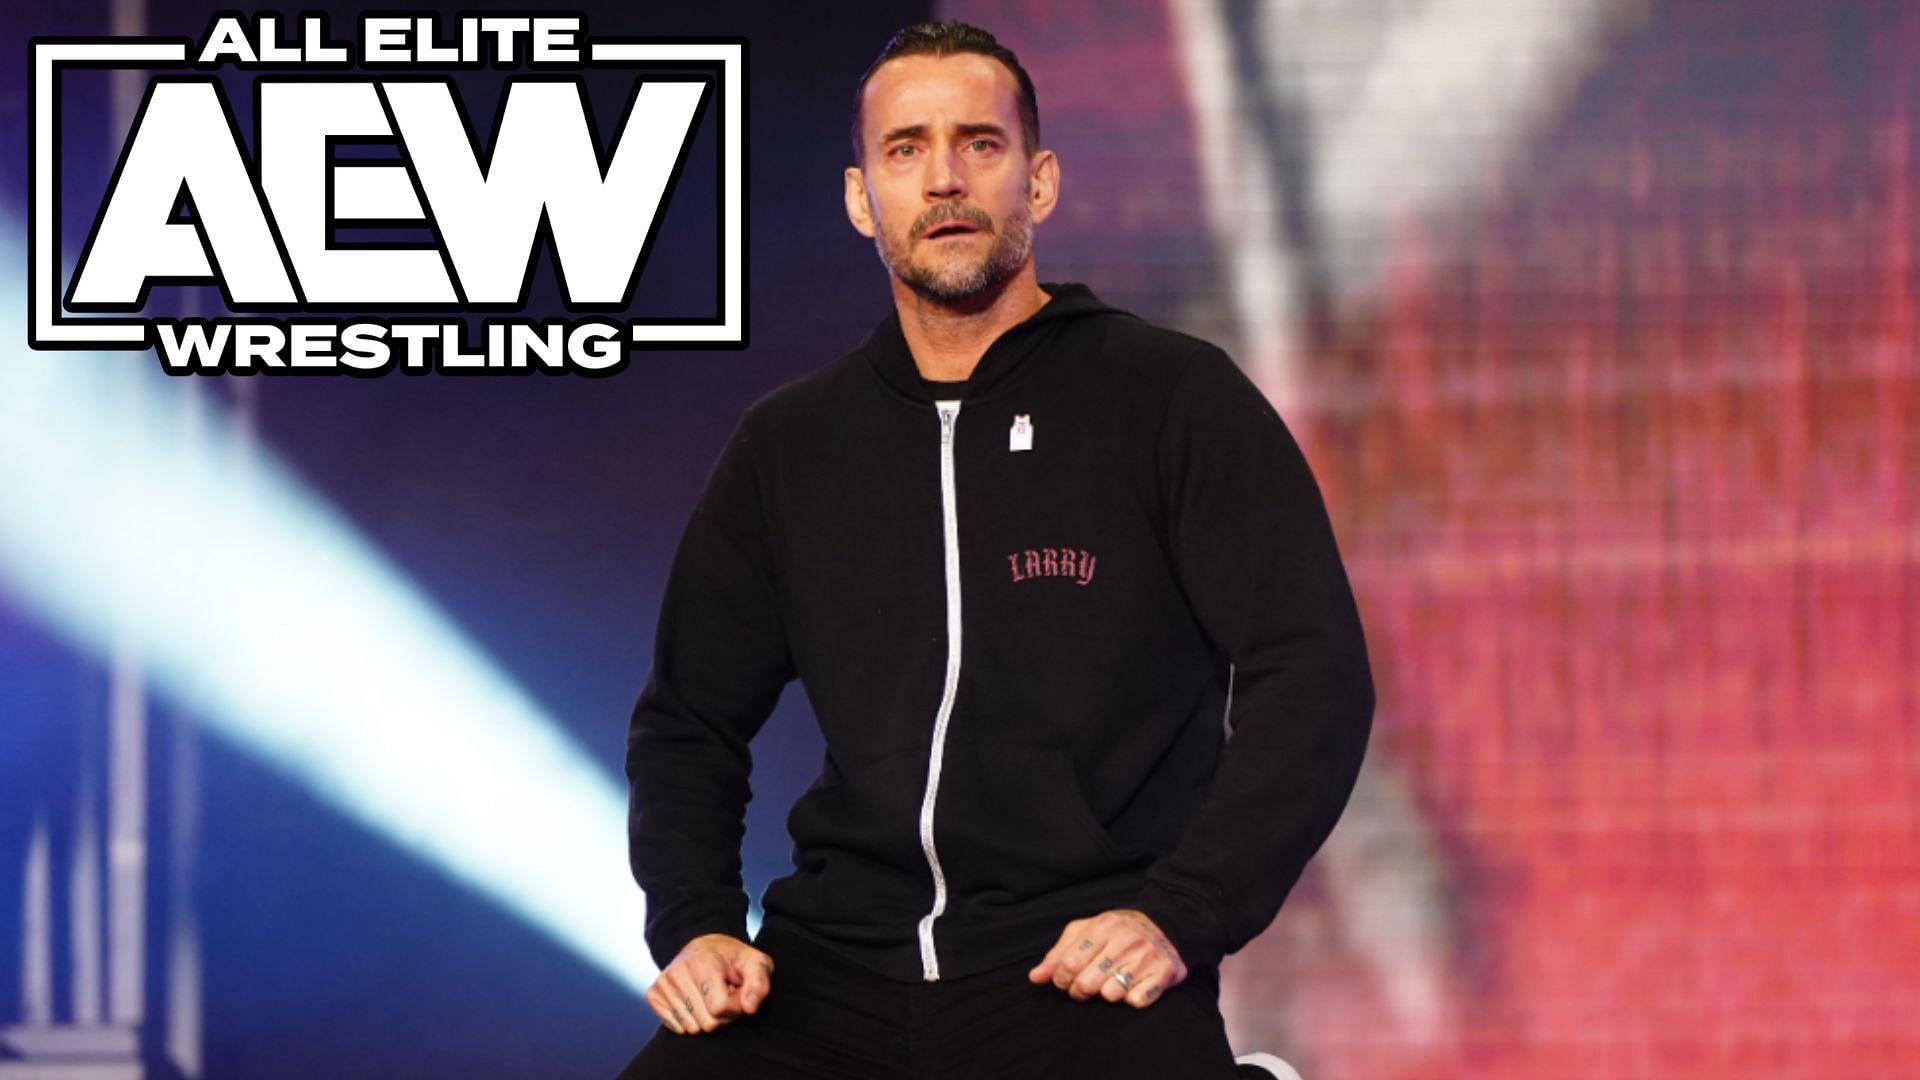 Could this lead to a CM Punk return?